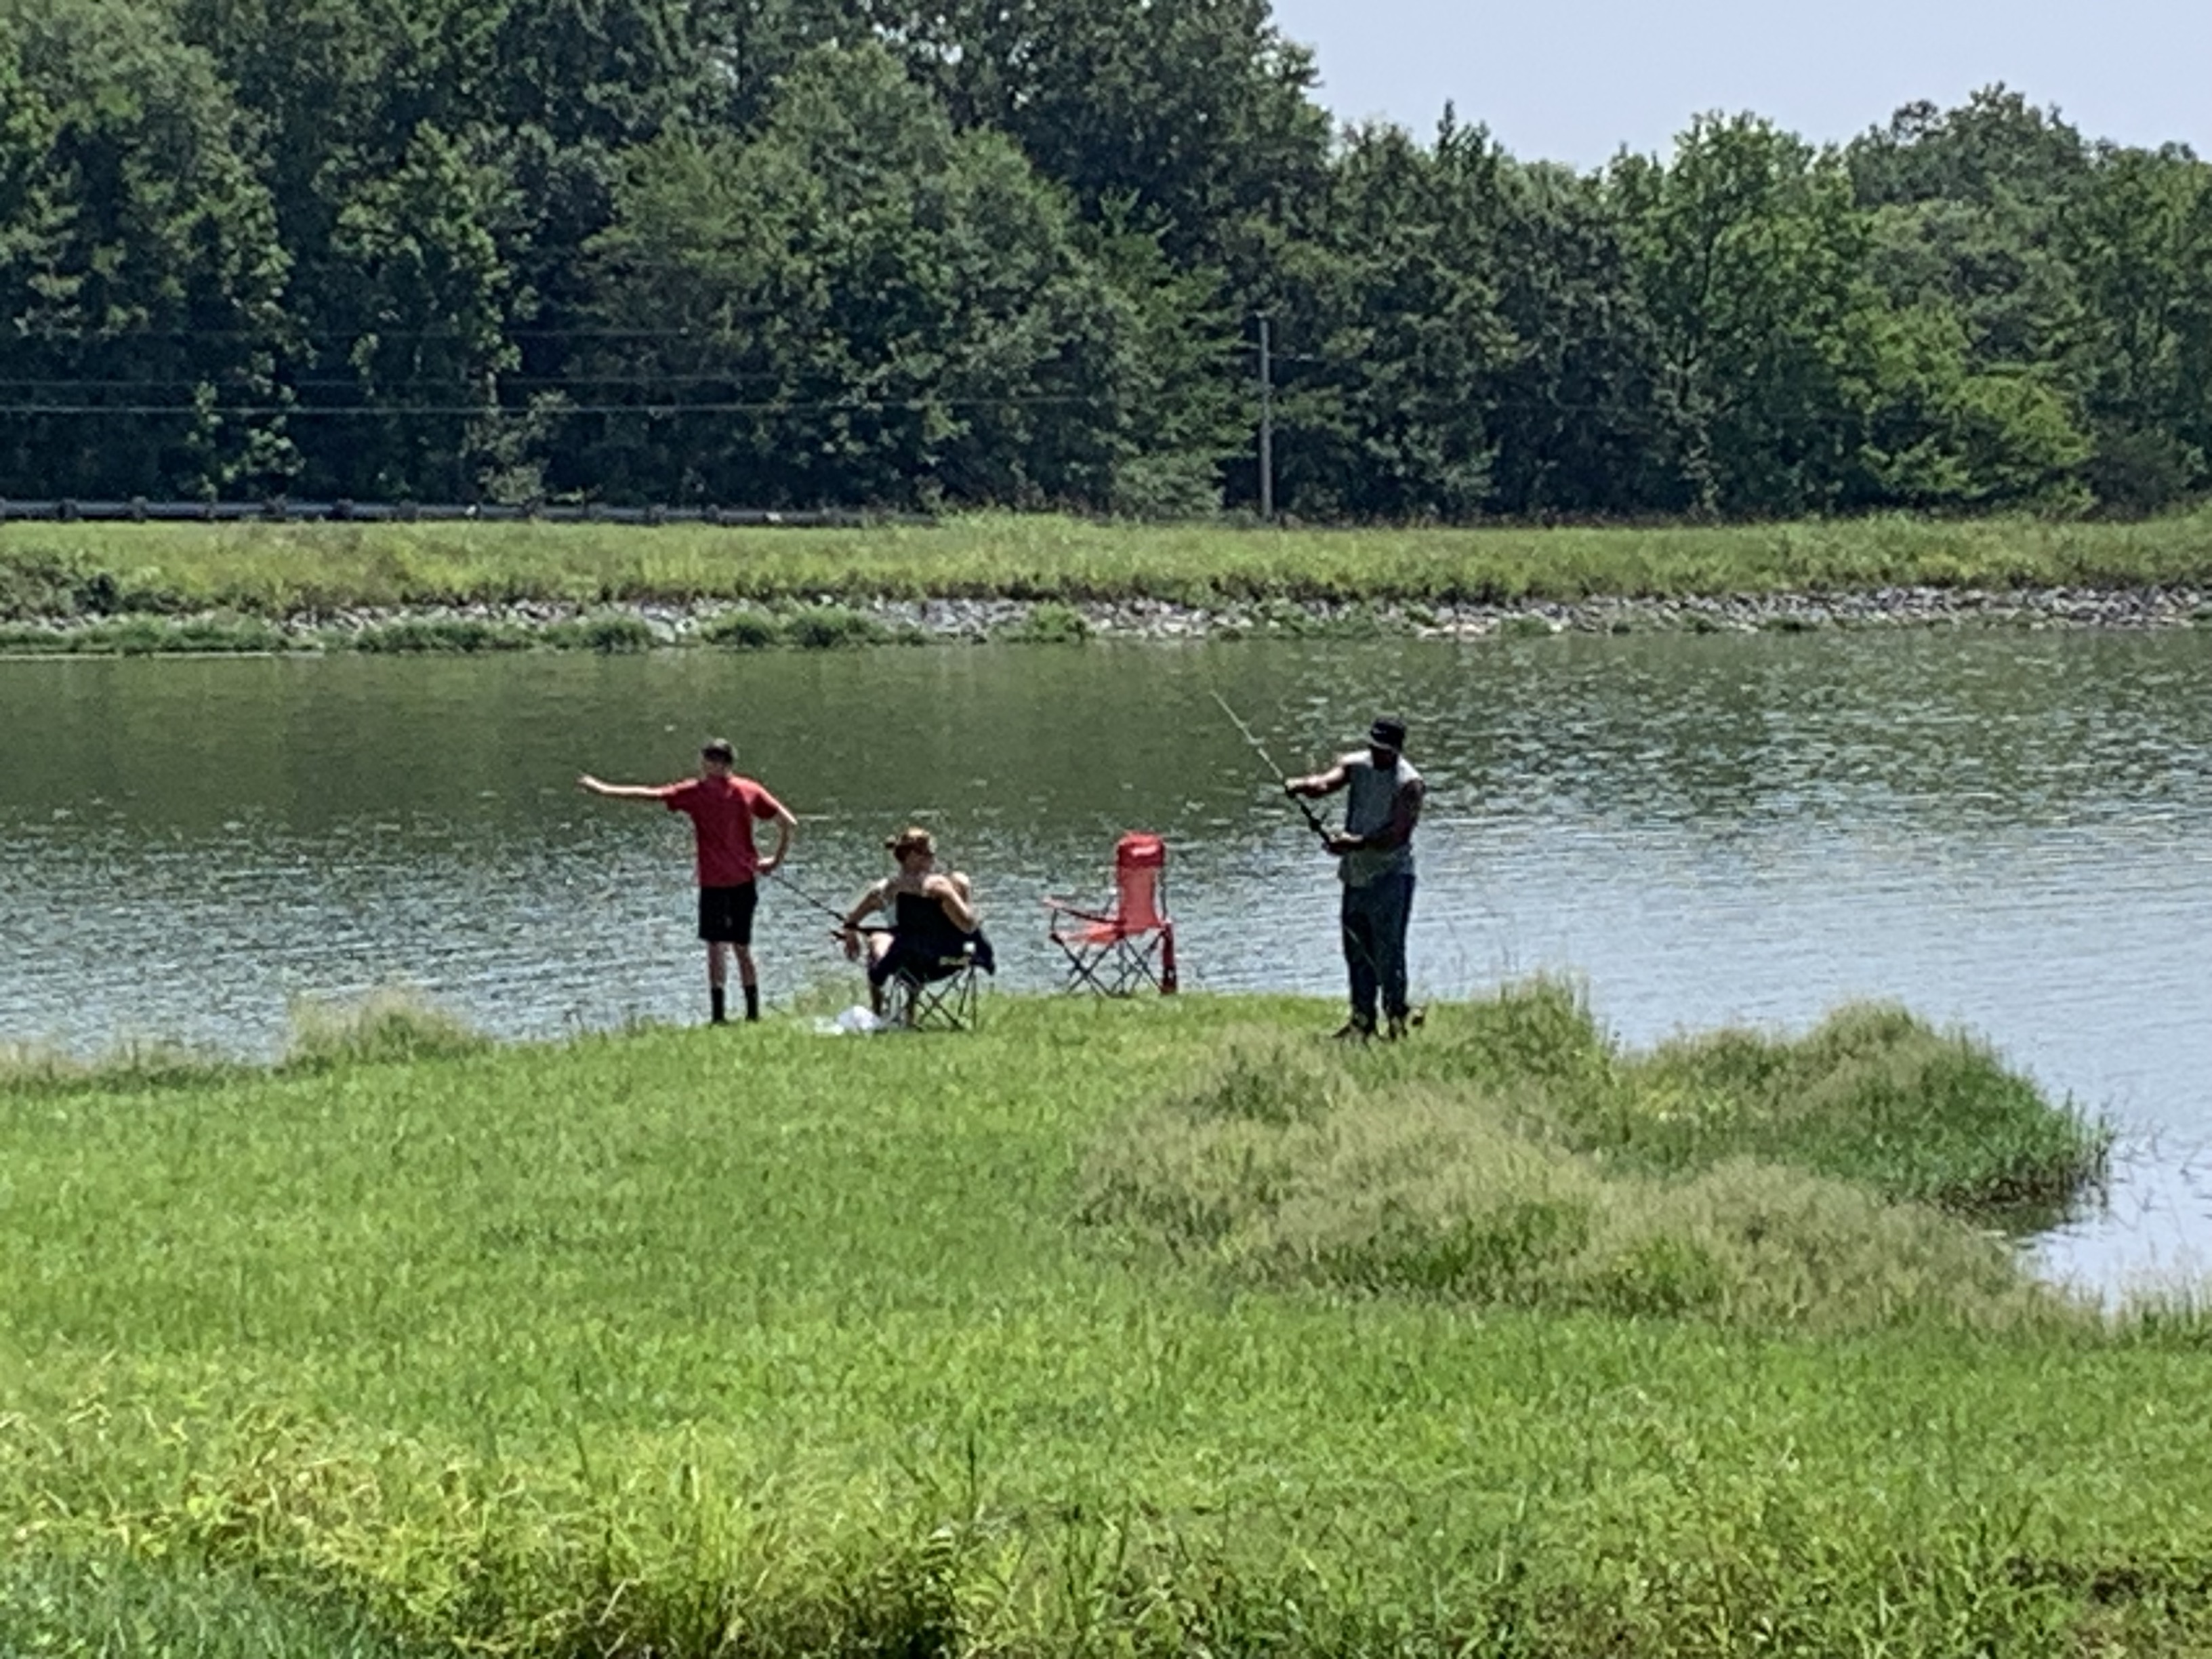 Three people along the bank of a lake holding fishing poles.